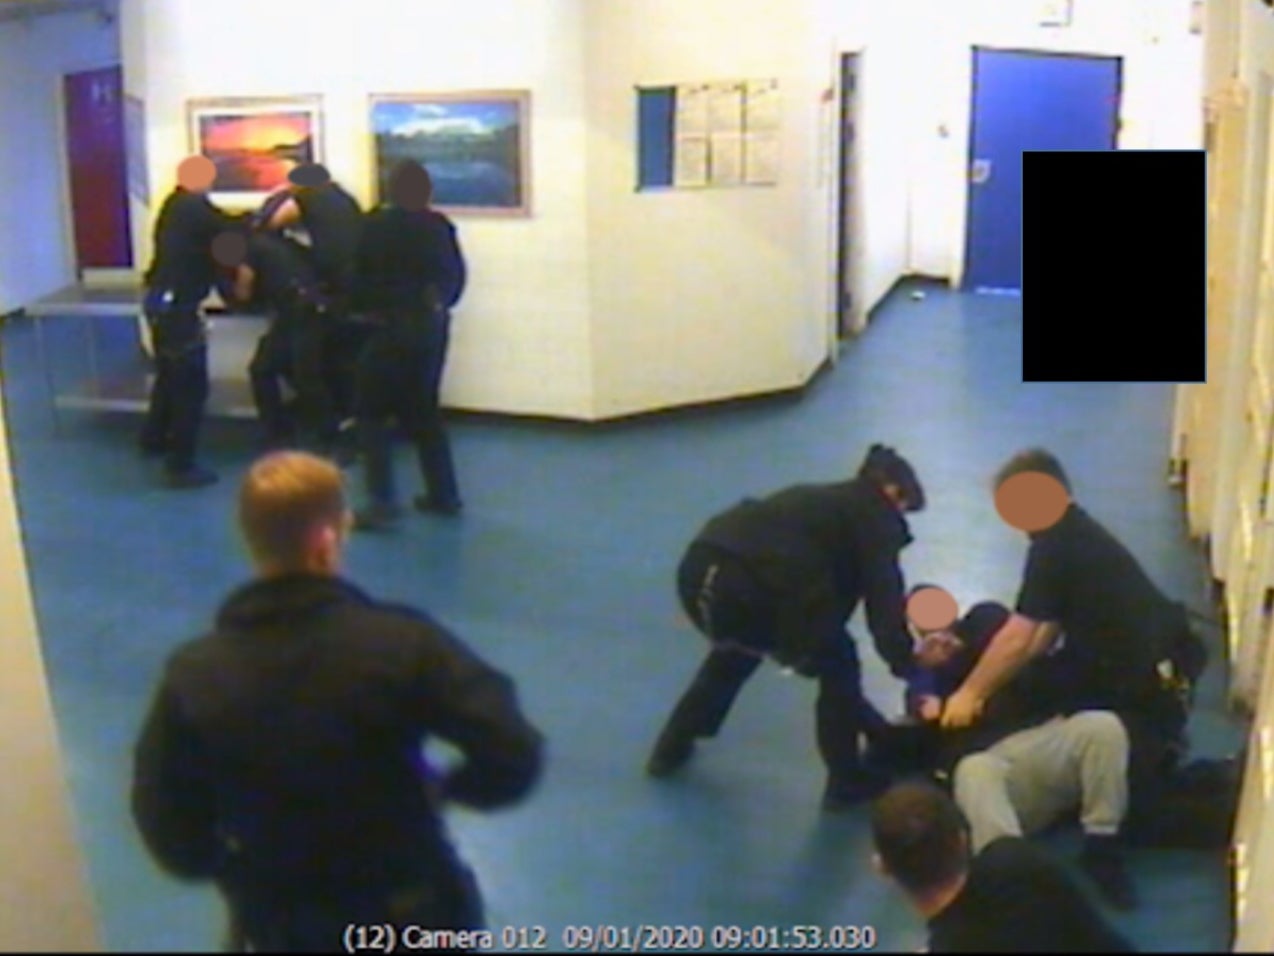 Prison officers restraining two inmates after a terror attack at HMP Whitemoor in Cambridgeshire on 9 January 2020